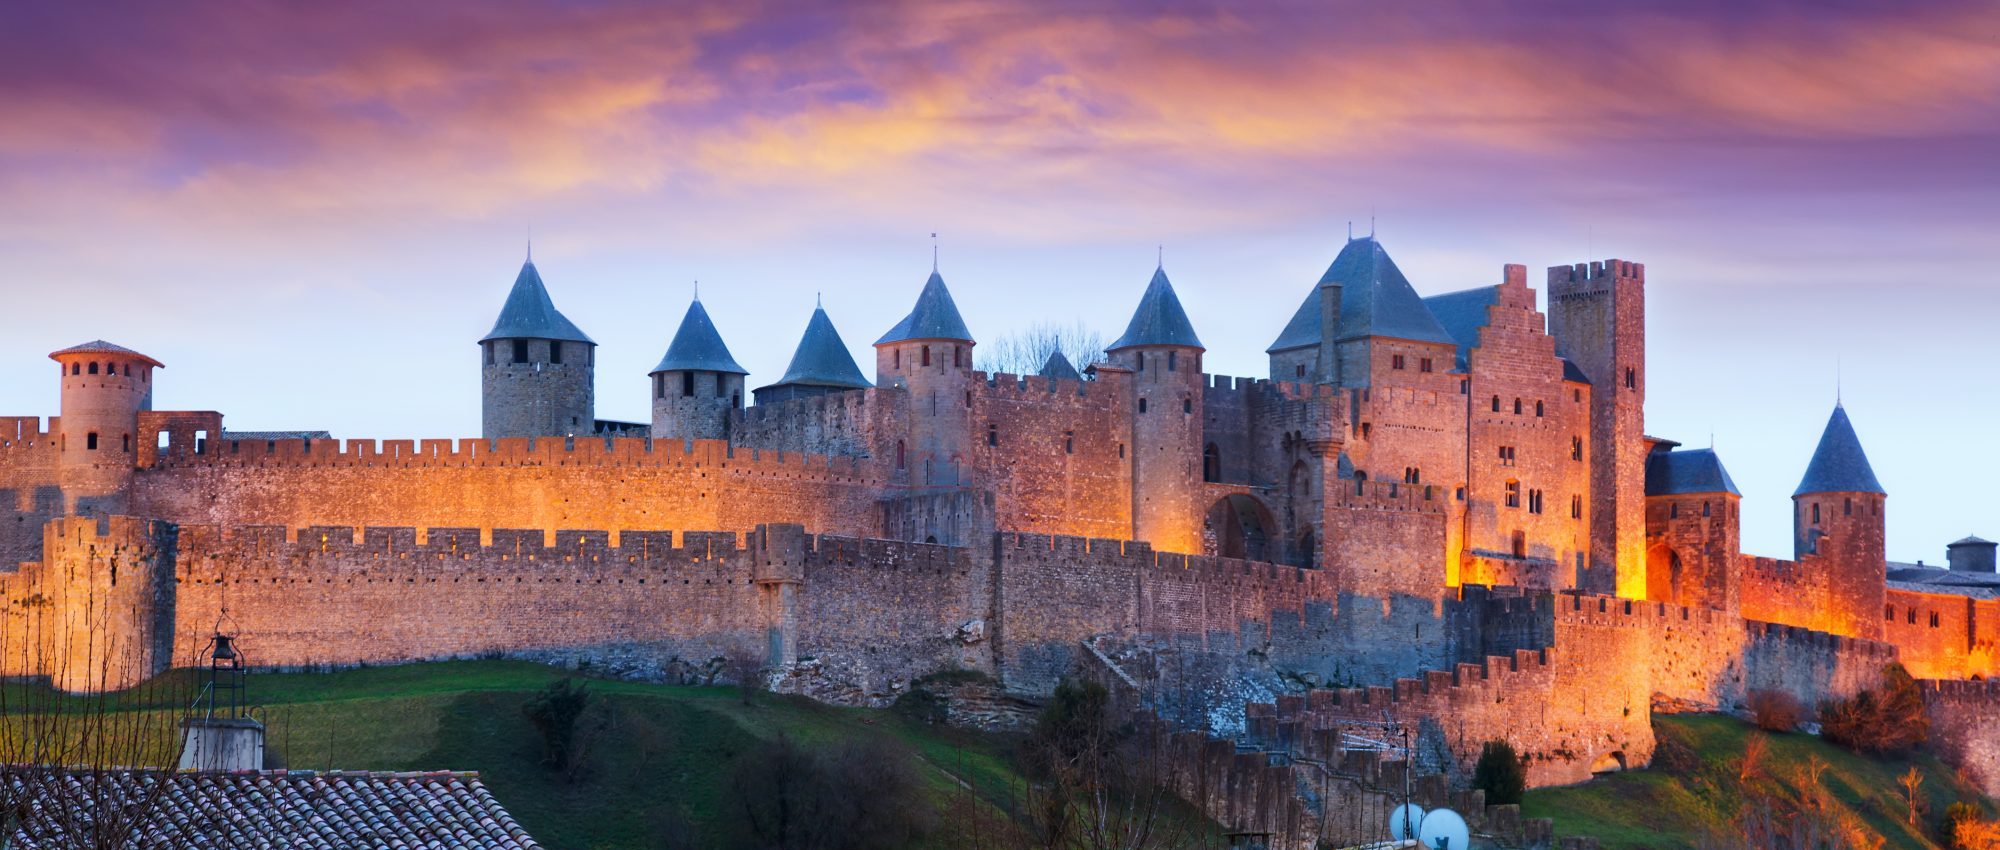 carcassonne rules change two cities